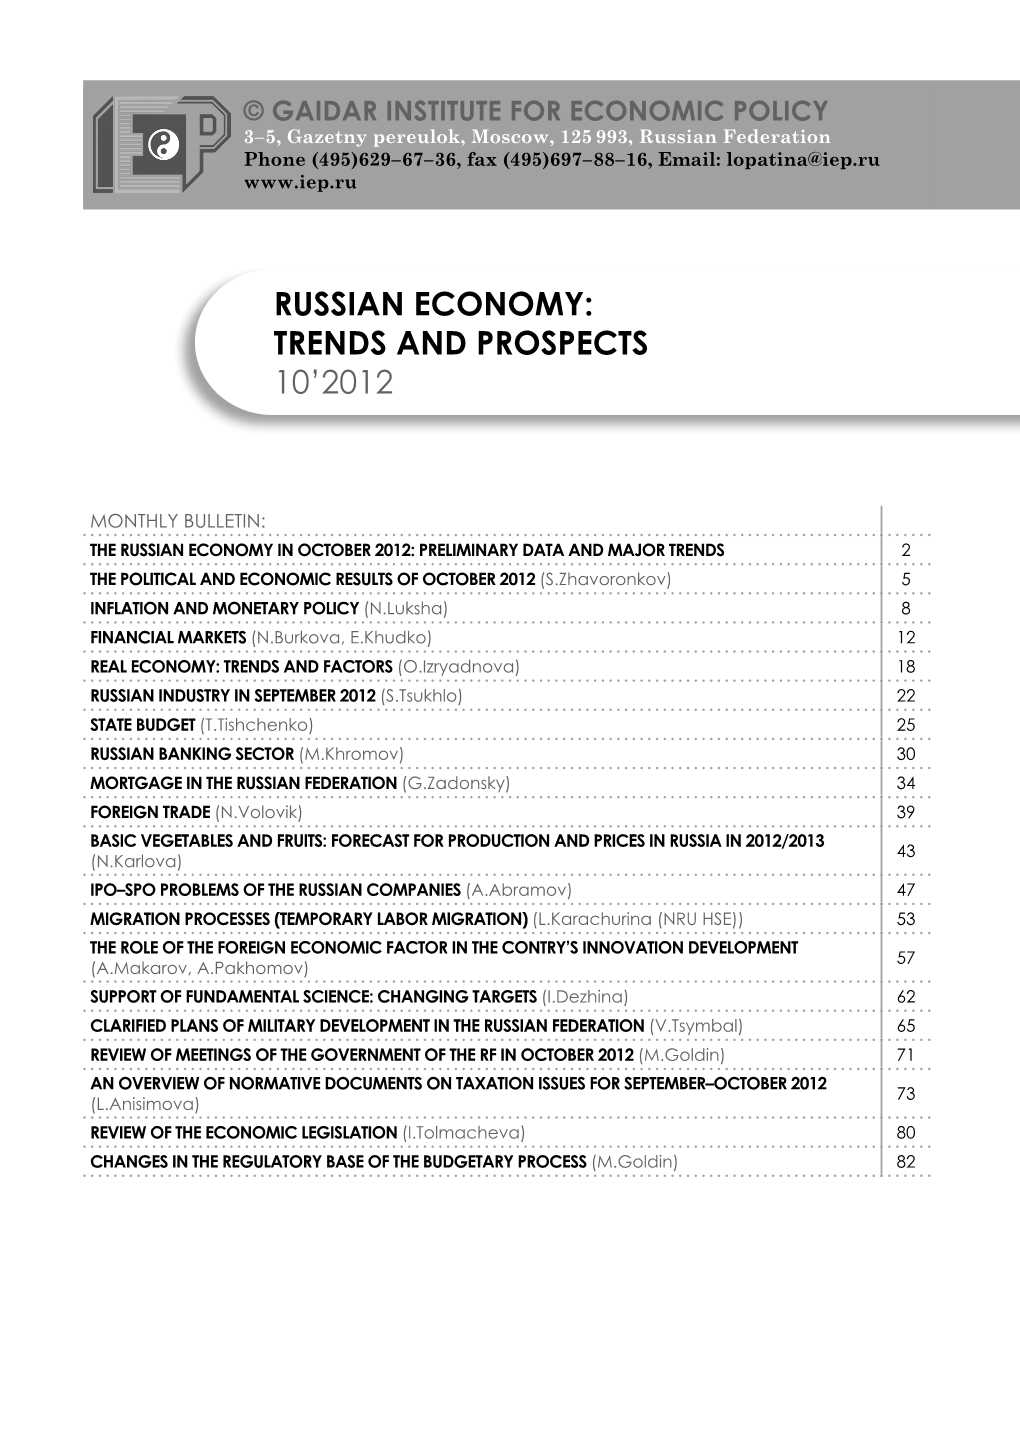 Russian Economy: Trends and Prospects 10'2012